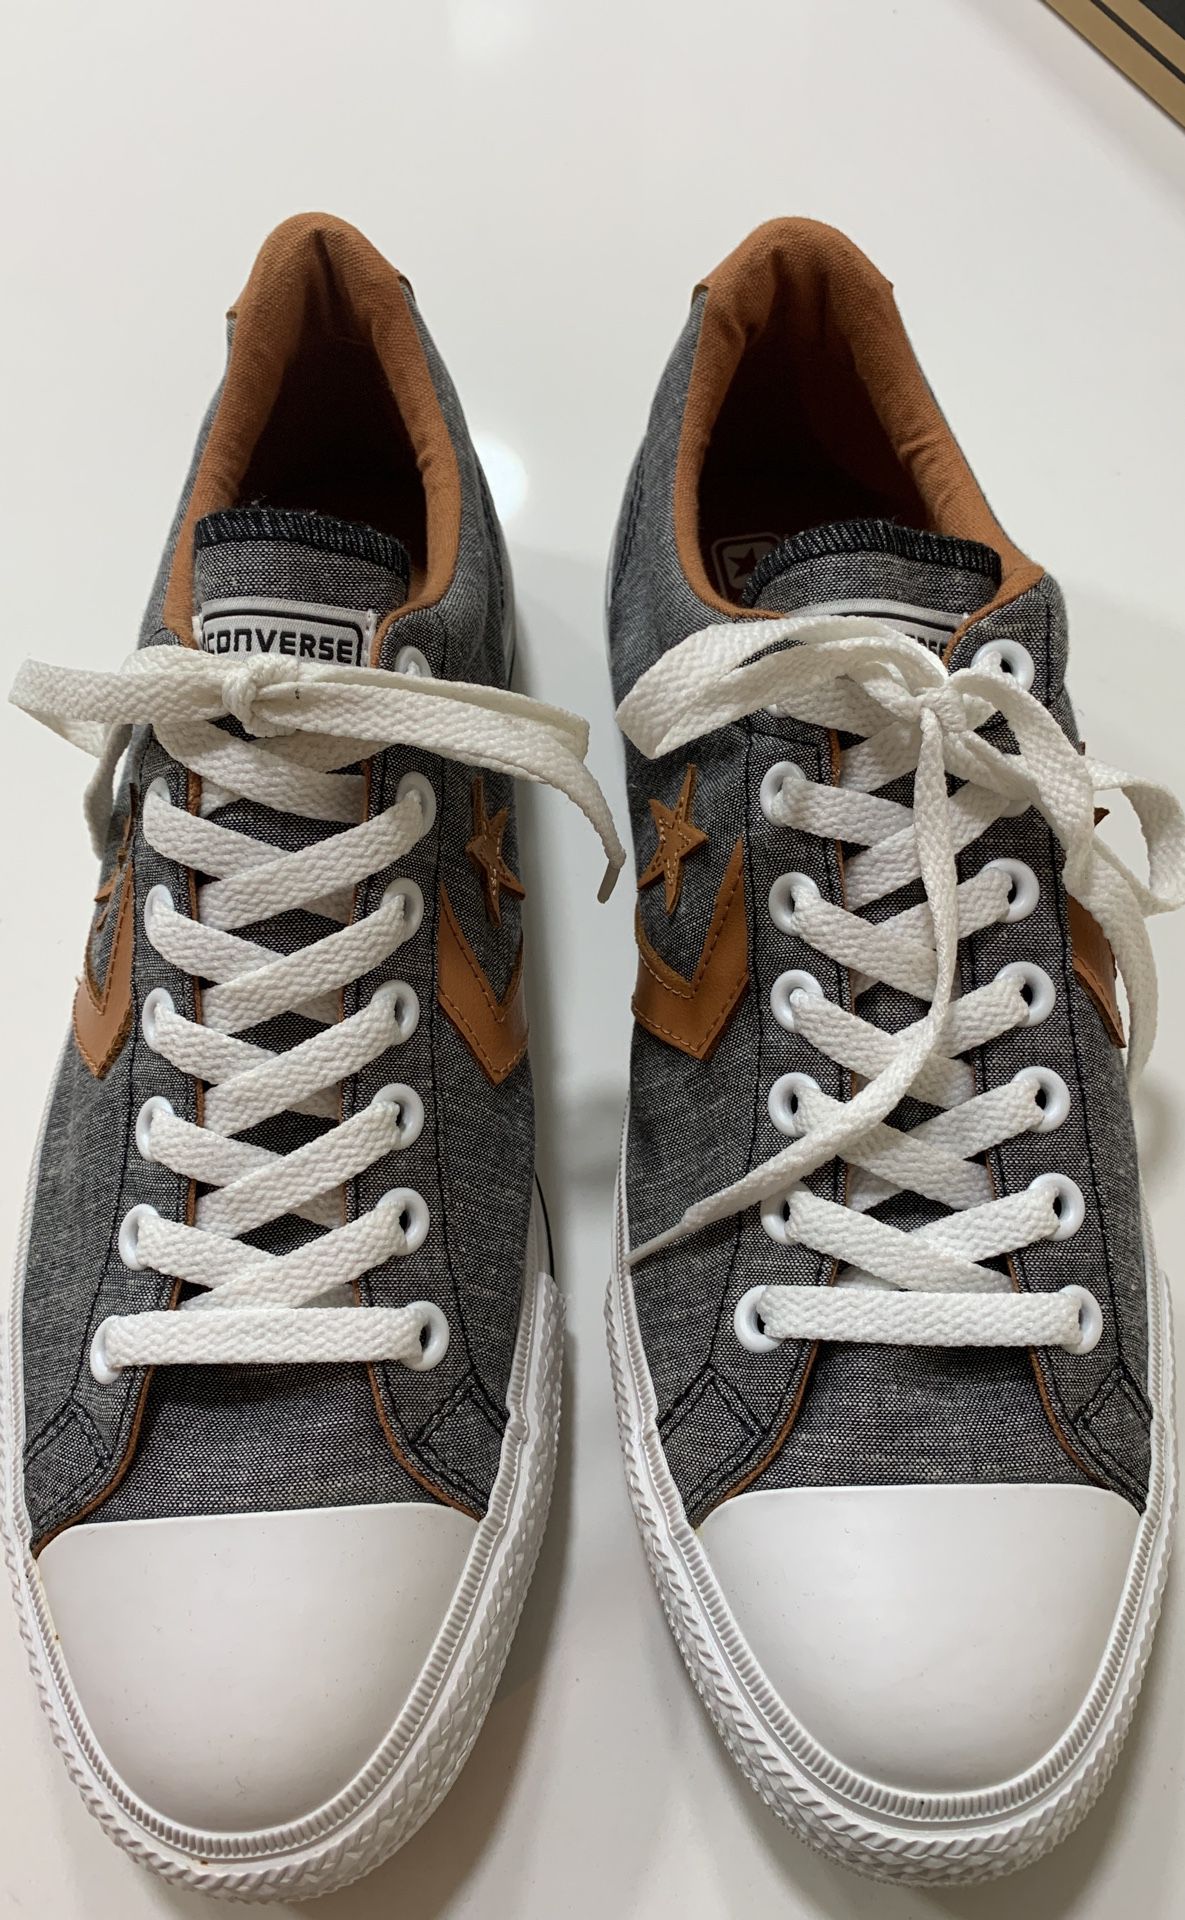 NEW! Men’s Converse All Star Size 11